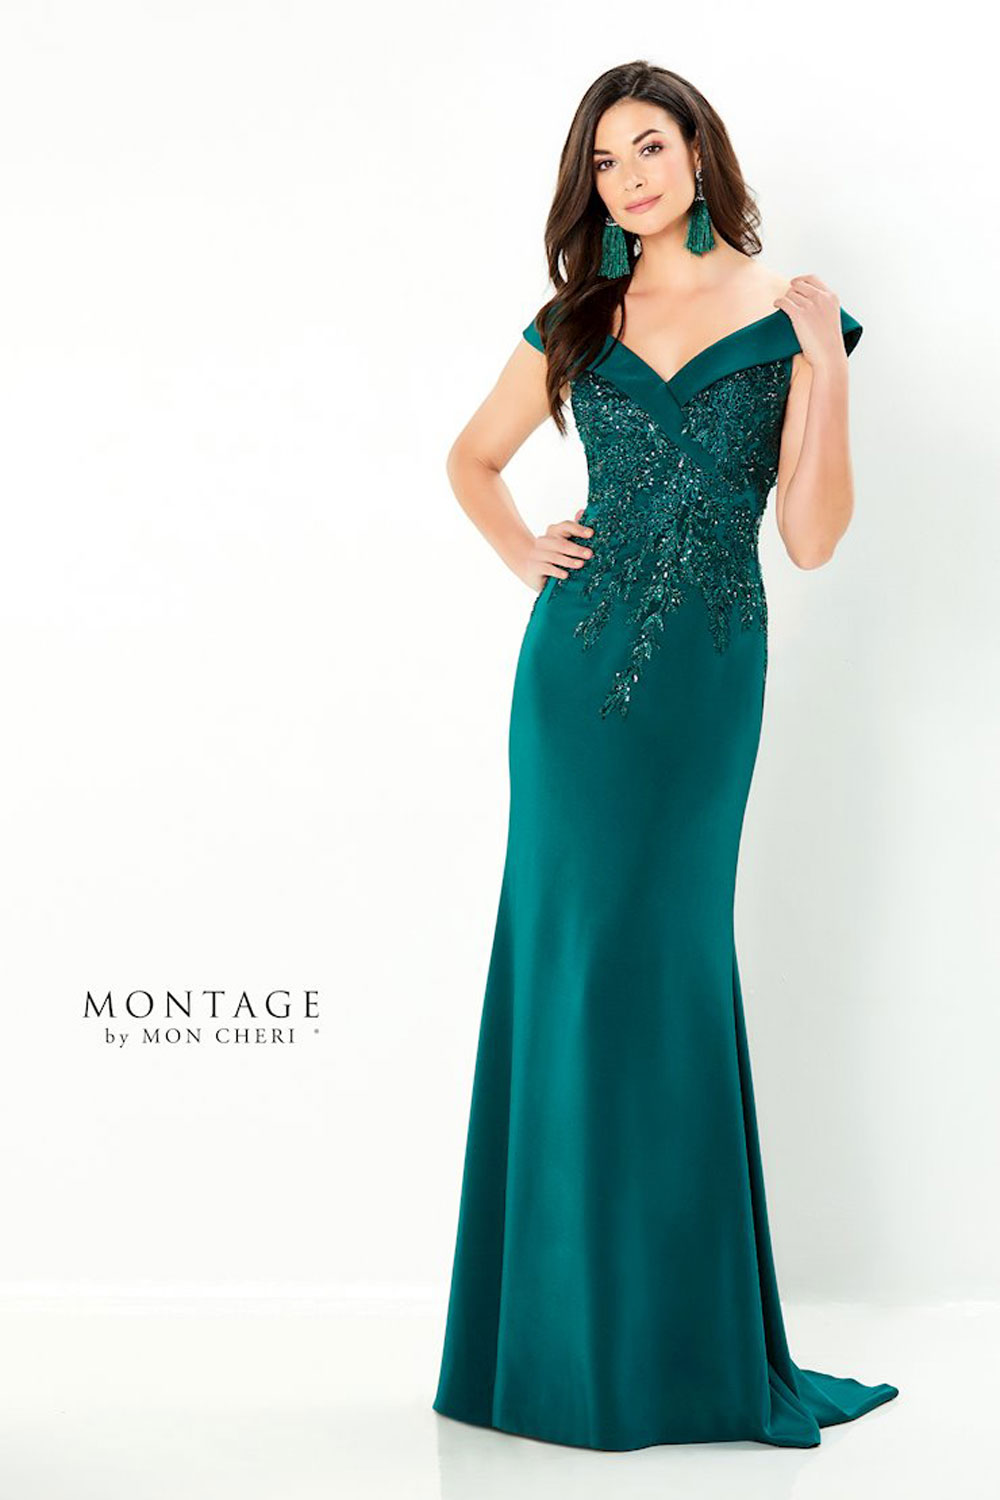 Fit & flare, off the shoulder, comes in navy blue & emerald